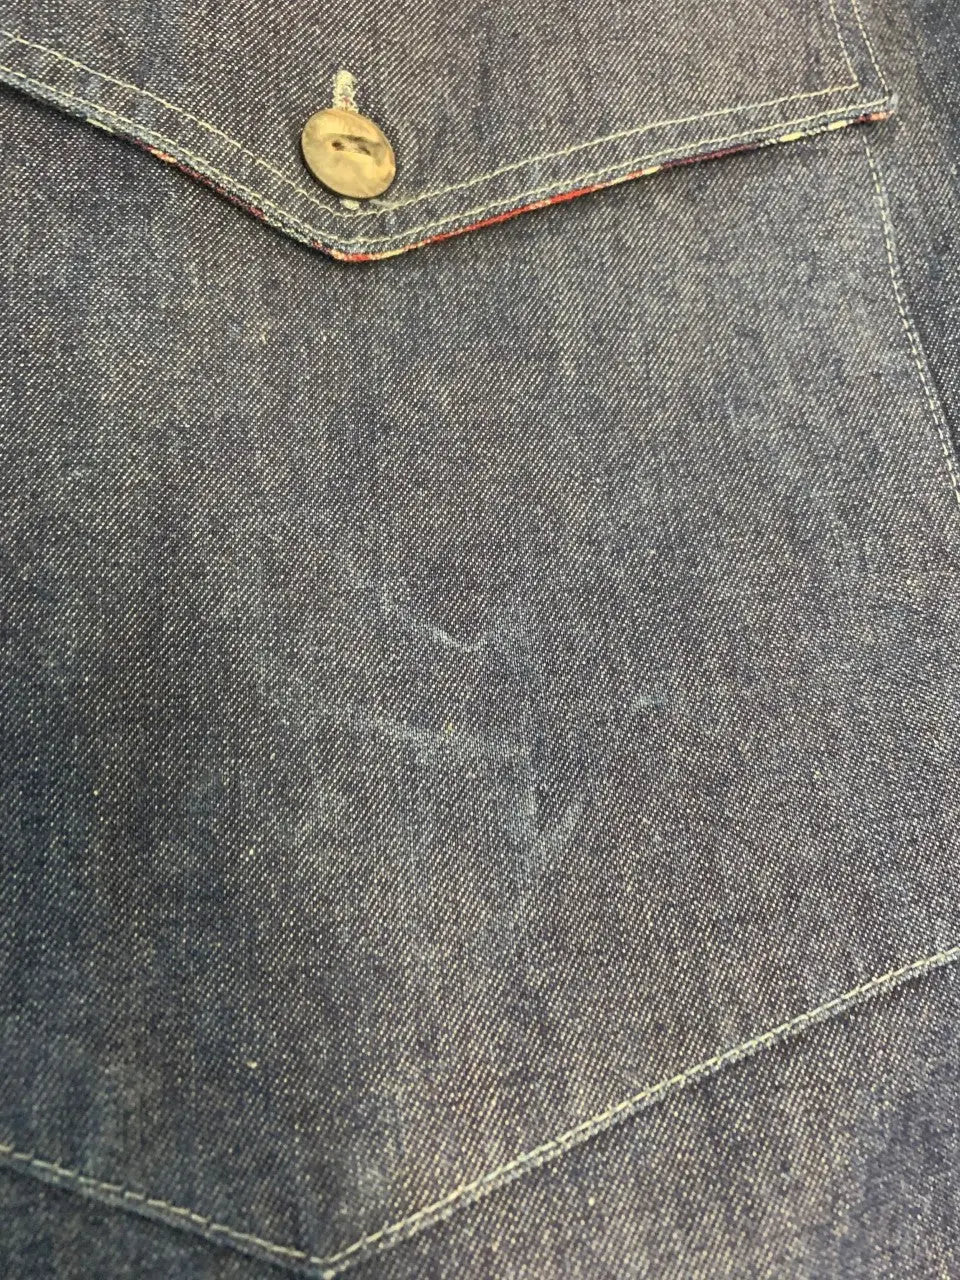 Point of Rallye - Denim Shirt- ThriftTale.com - Vintage and second handclothing